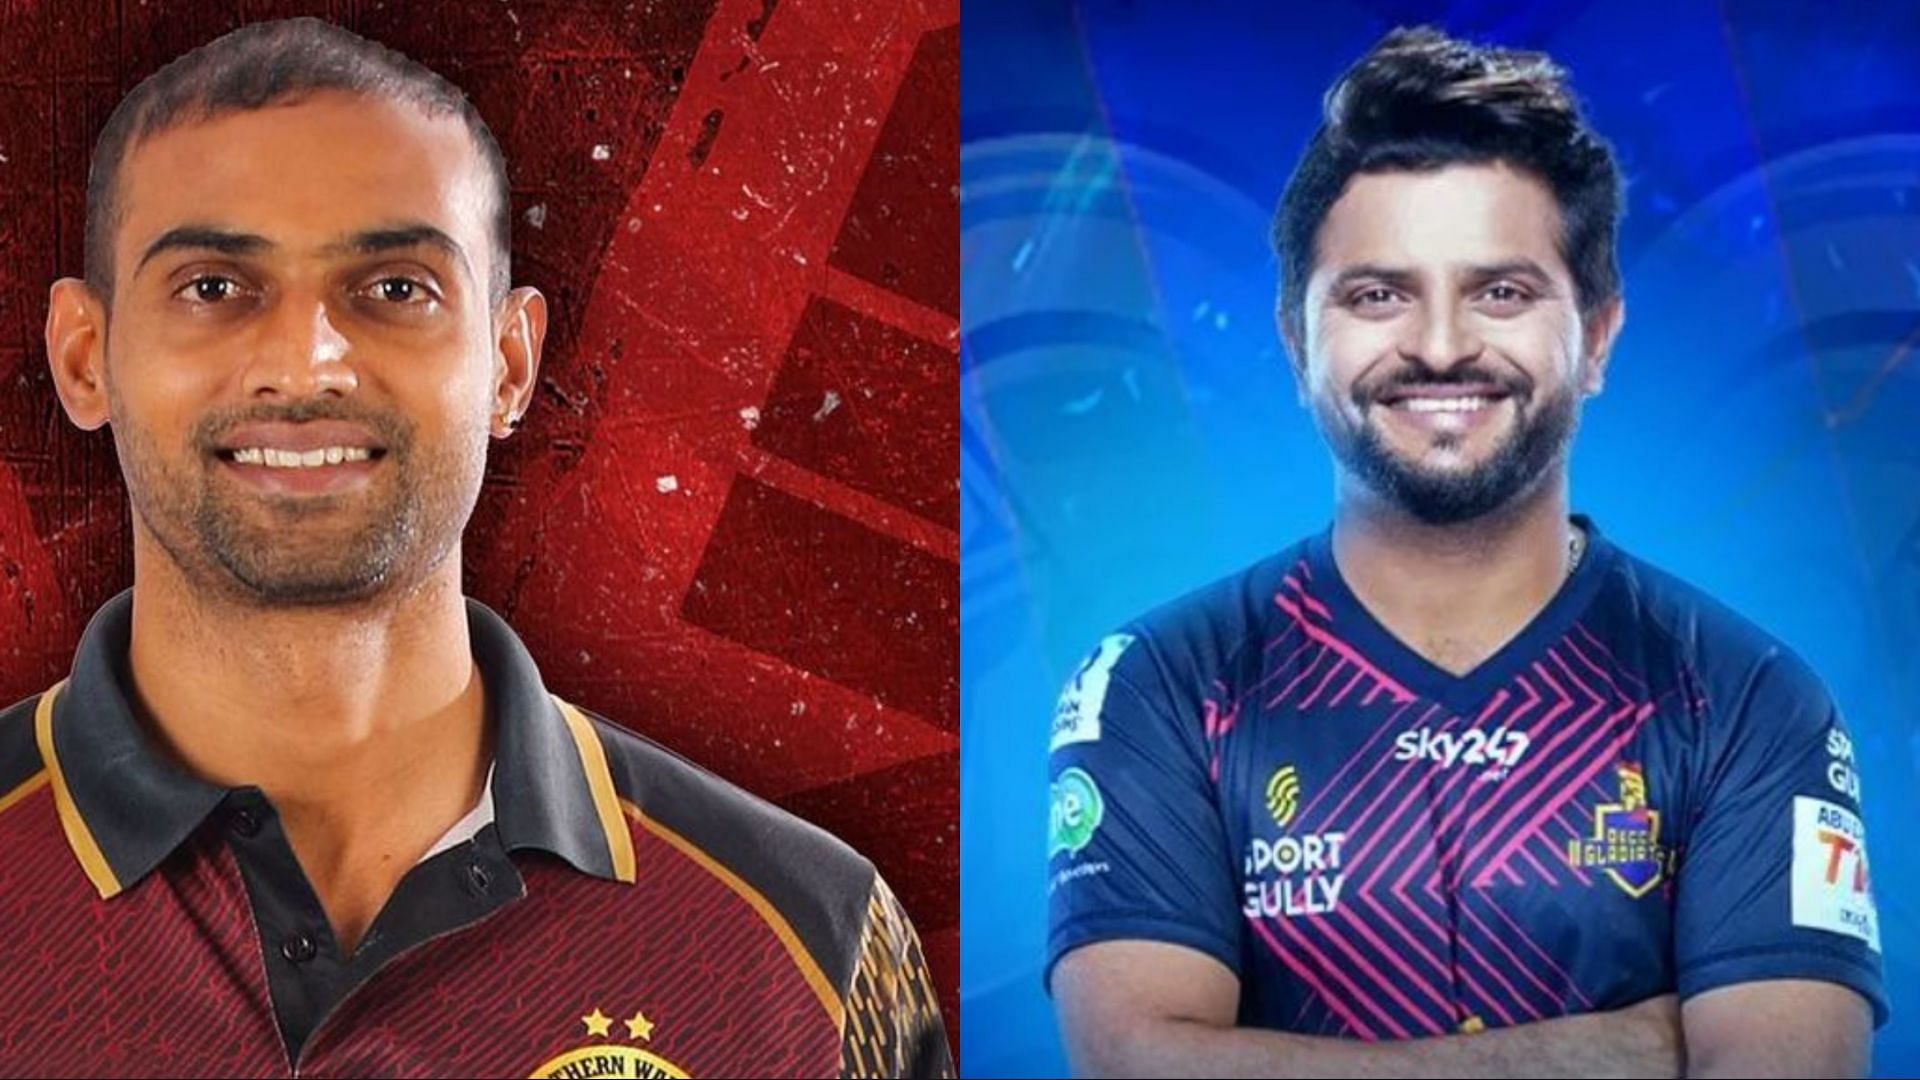 Suresh Raina and Abhimanyu Mithun have signed up with Abu Dhabi T10 League teams (Image: Instagram)